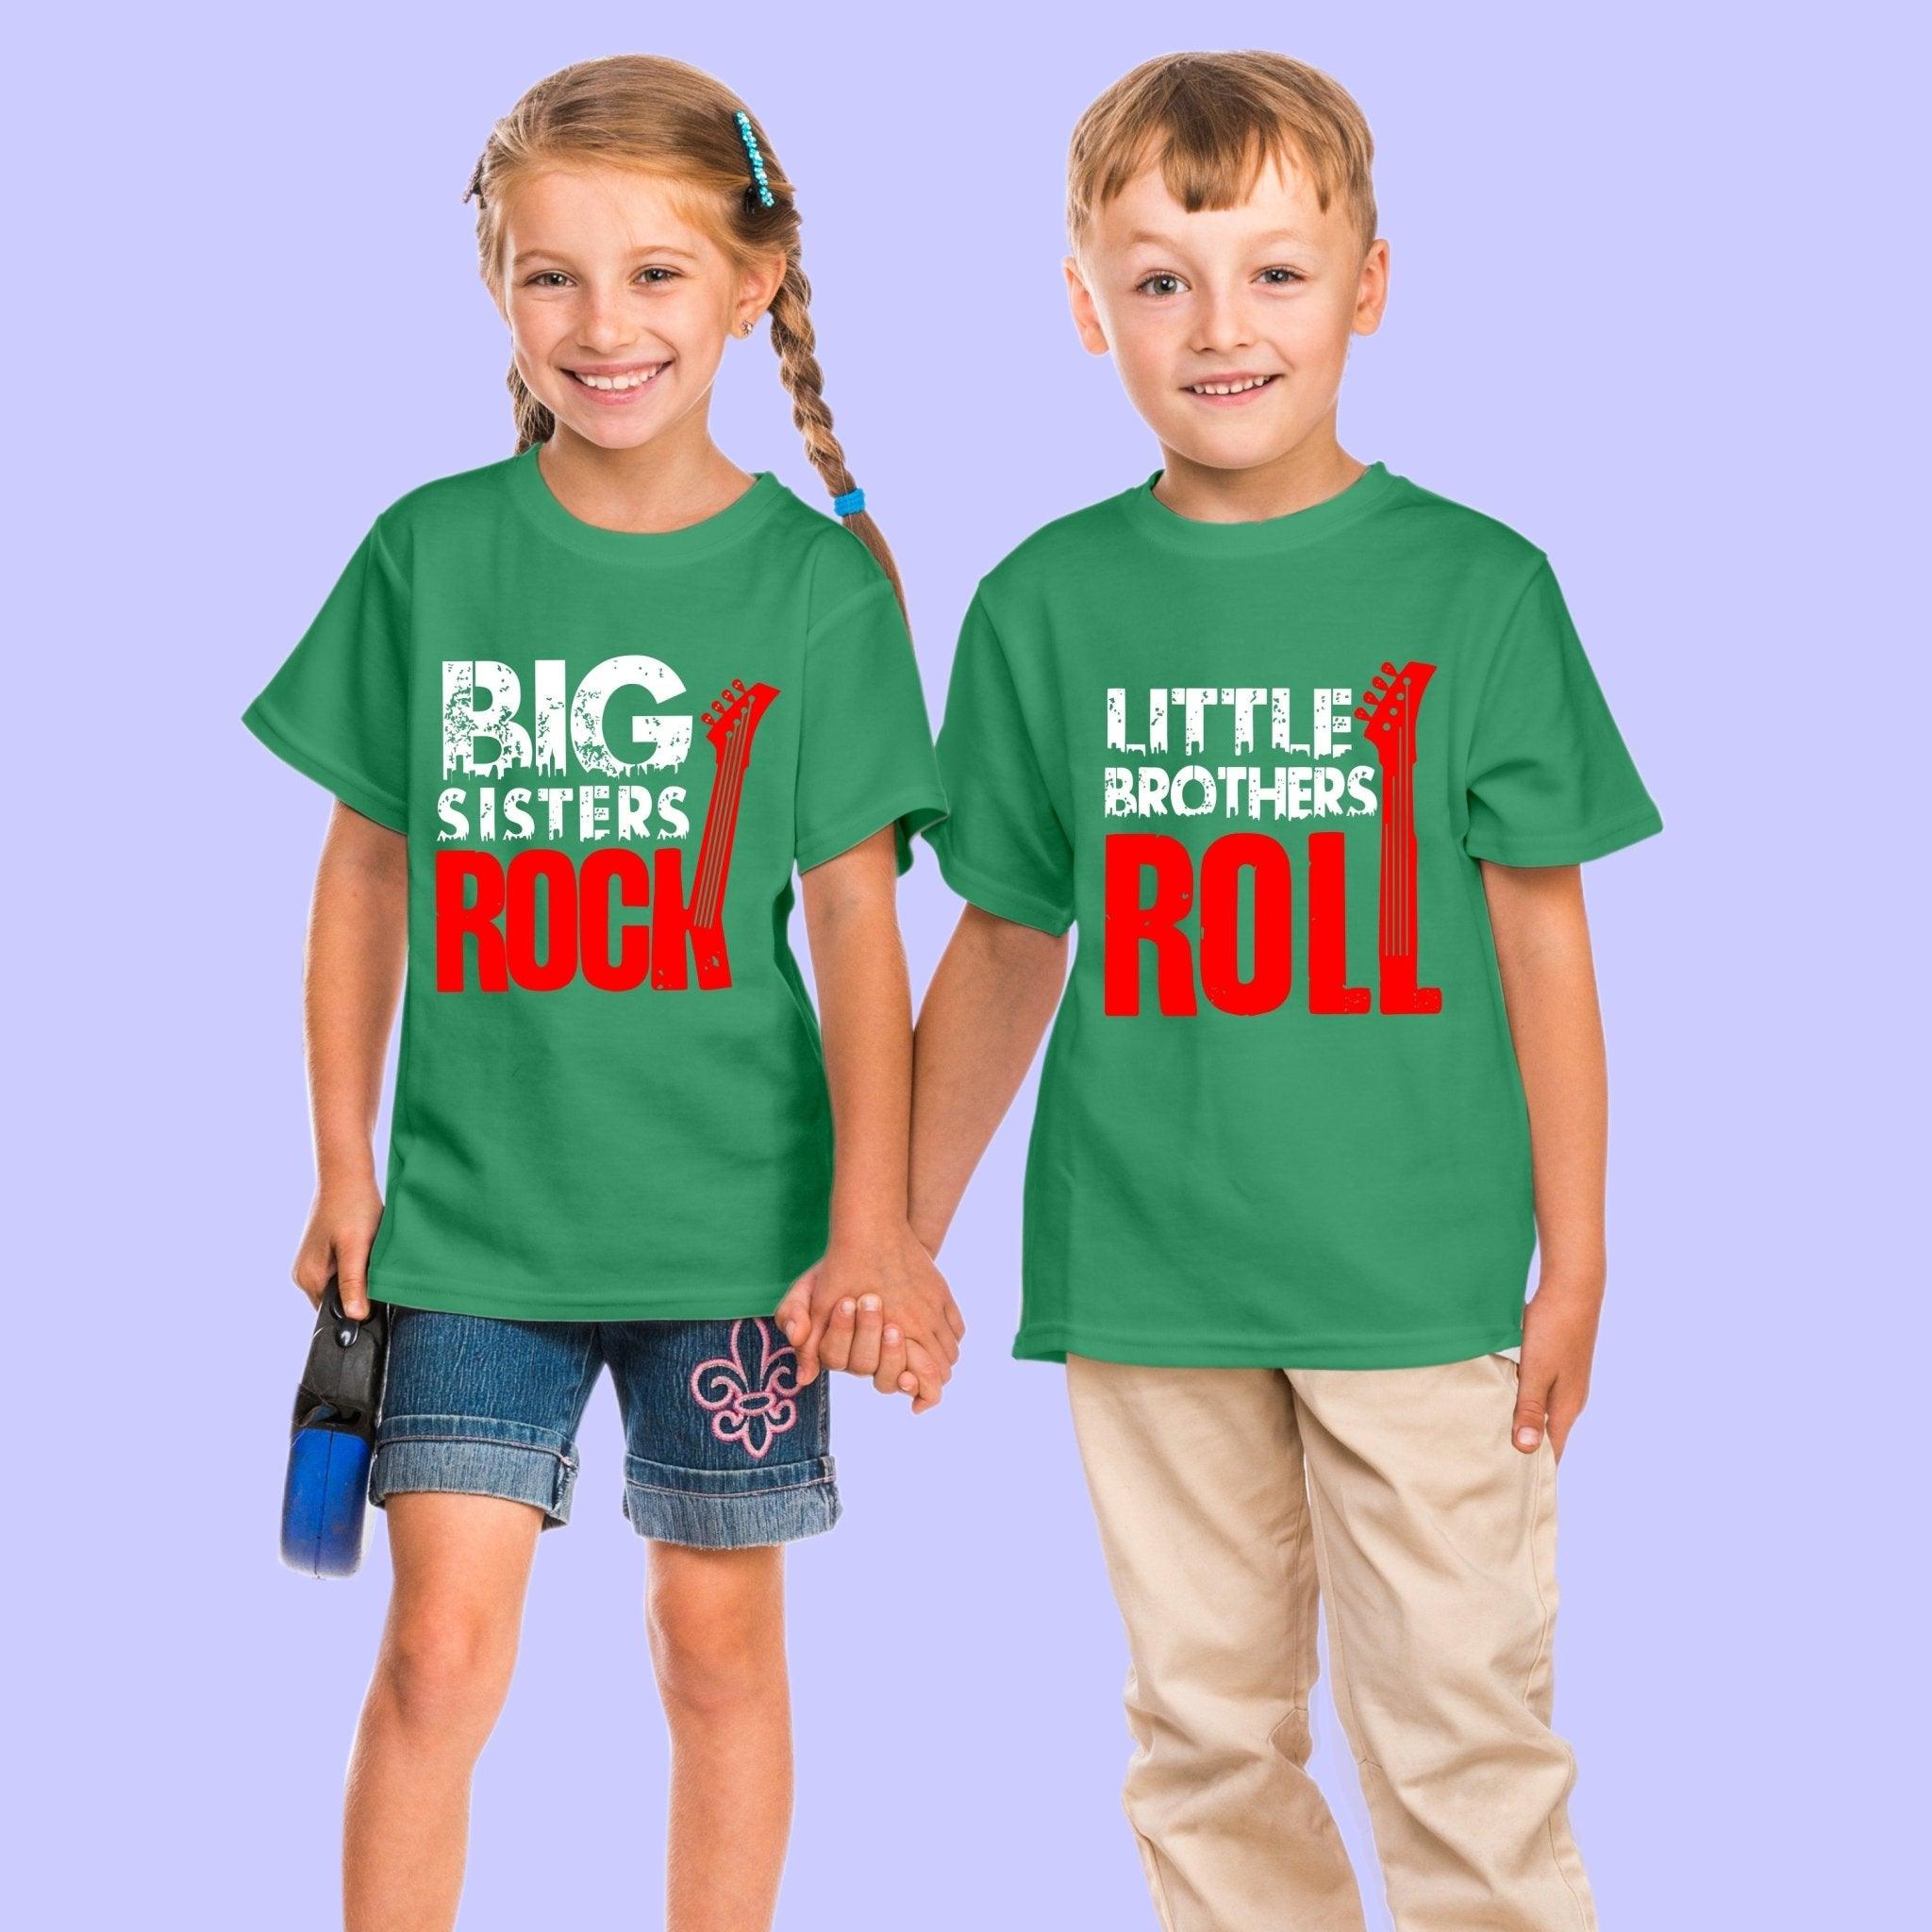 Sibling T Shirt for Kids Brother and Sister in Green Colour - Big Sister Rocks little Brother Rools